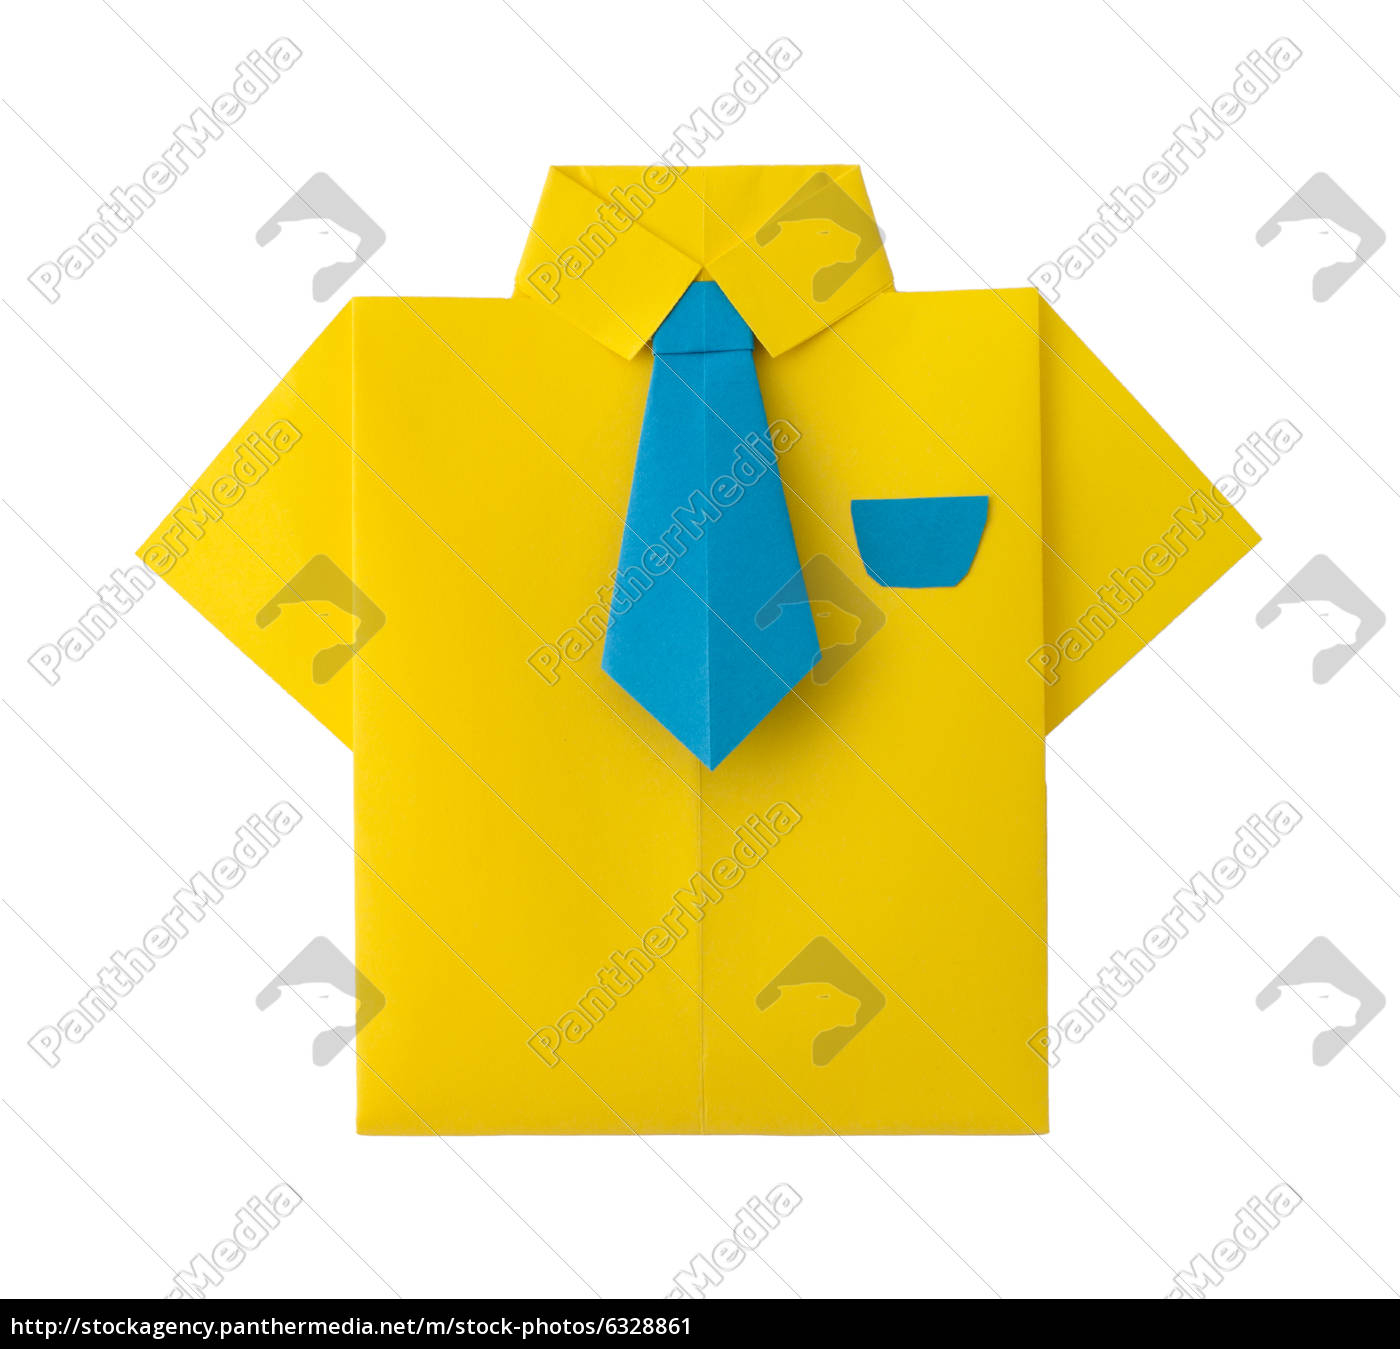 Origami Shirt And Tie Origami Dollar Shirt And Tie Dreamworks